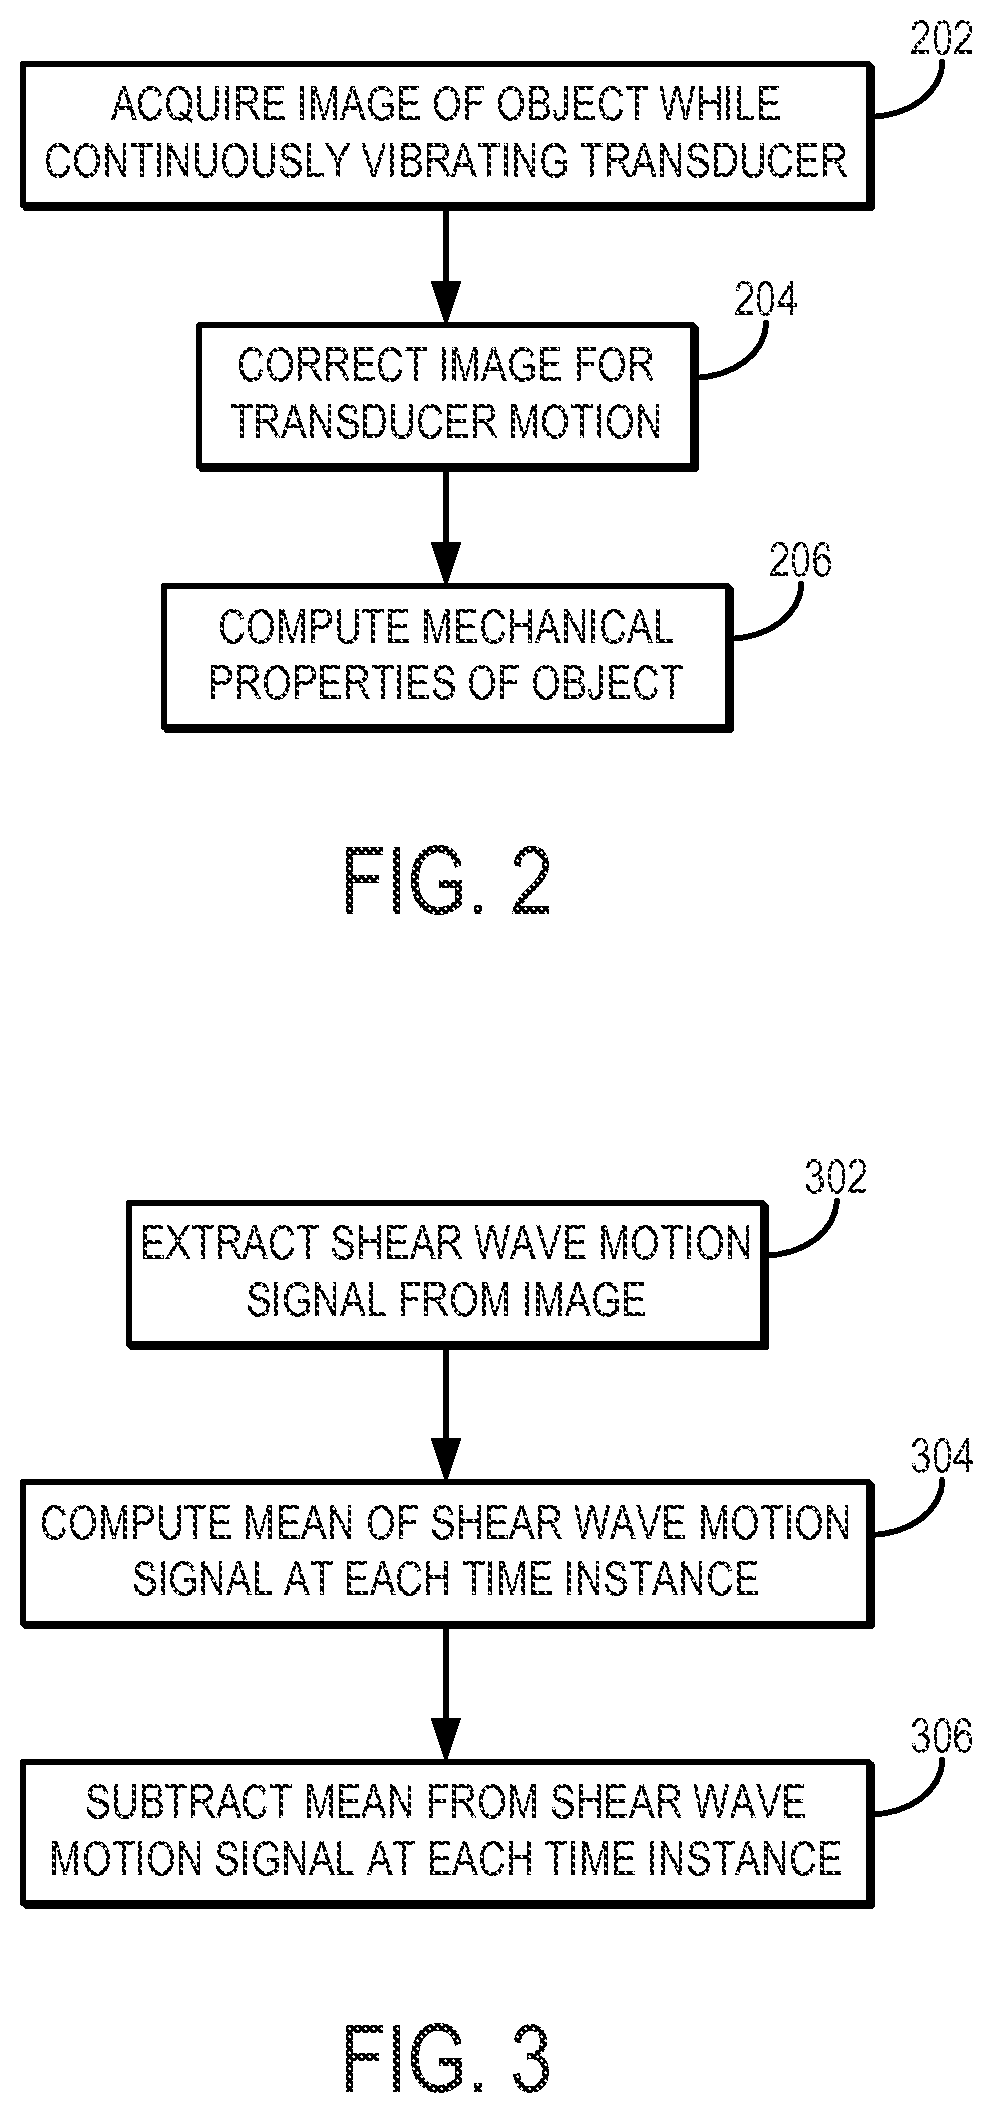 Method for ultrasound elastography through continuous vibration of an ultrasound transducer